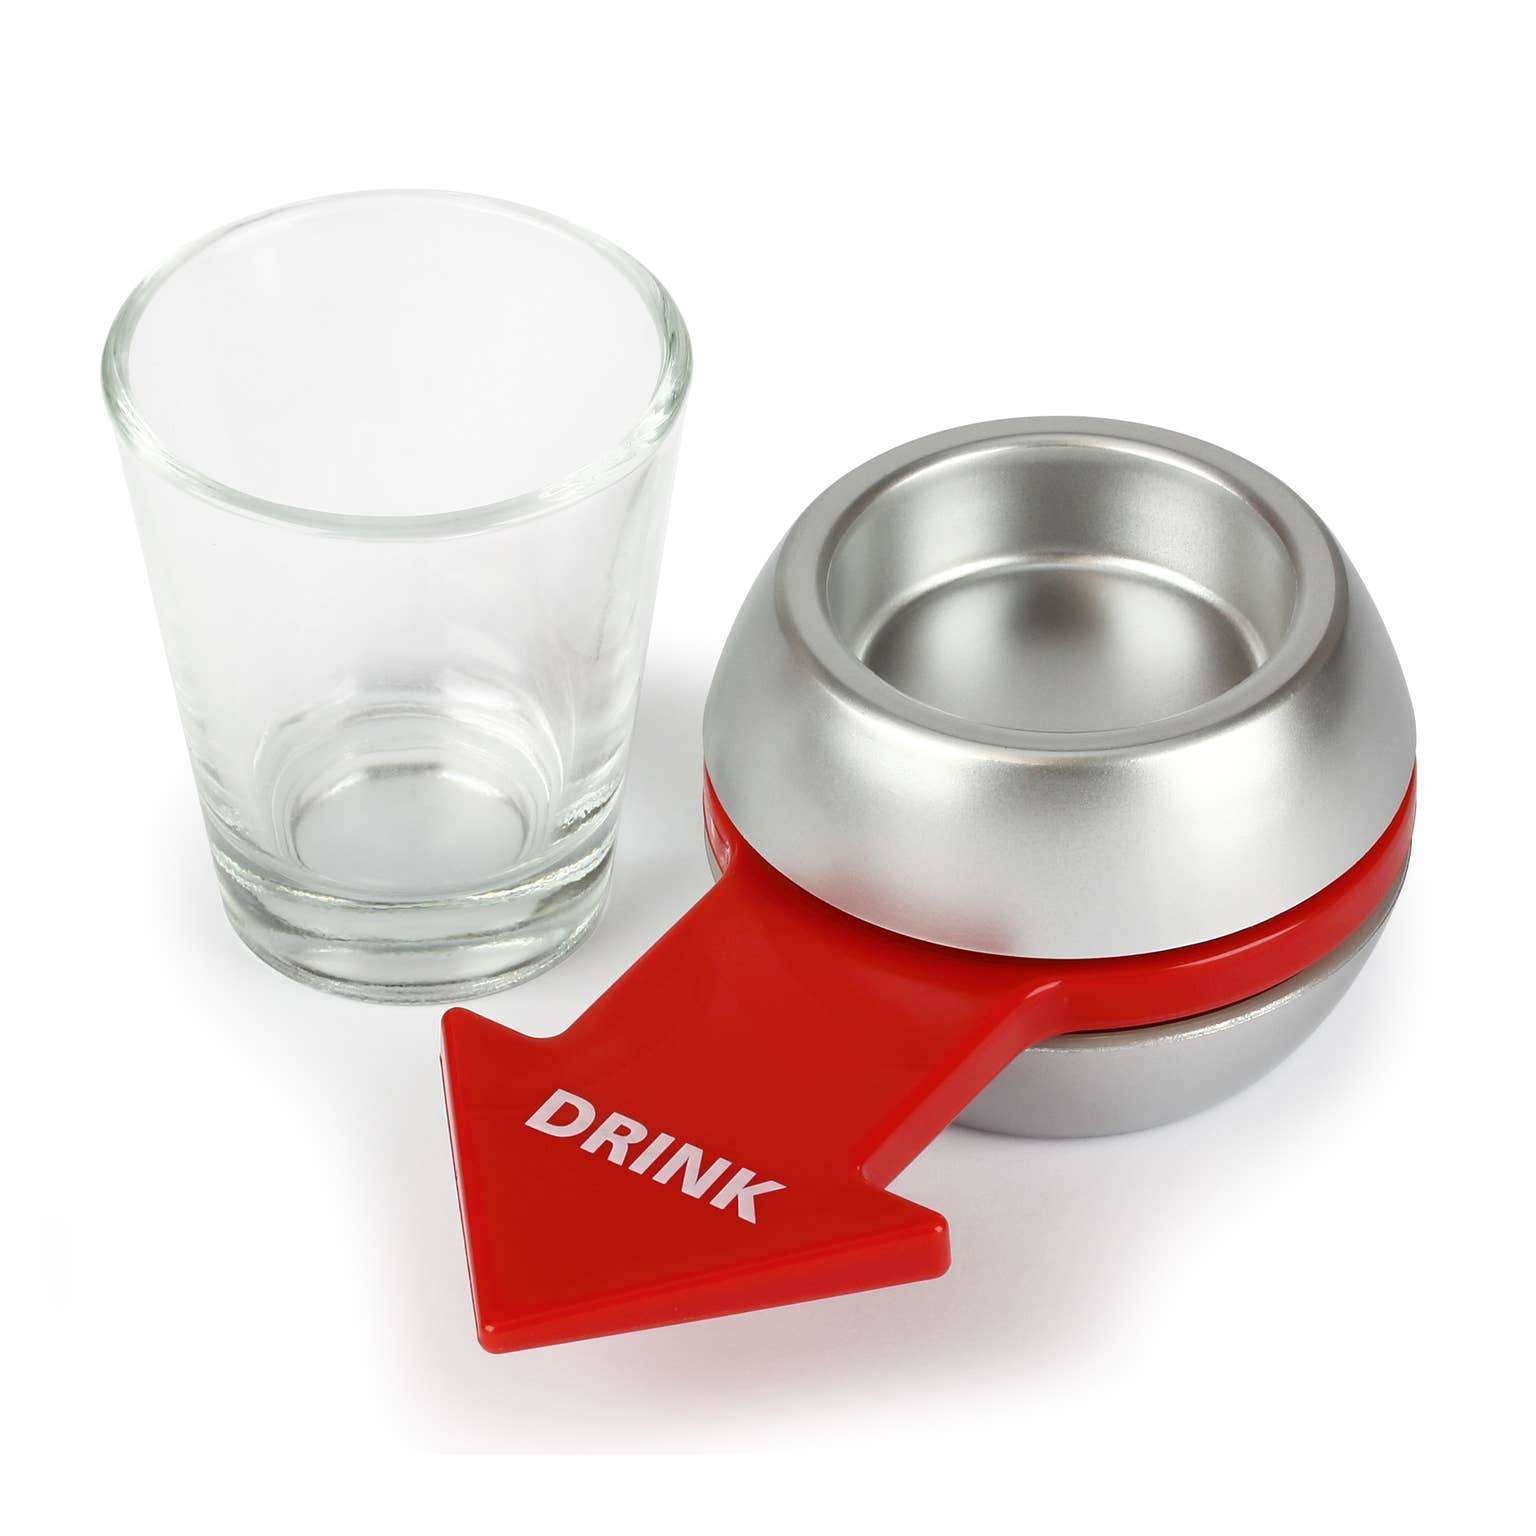 Spin the Shot Drinking Game